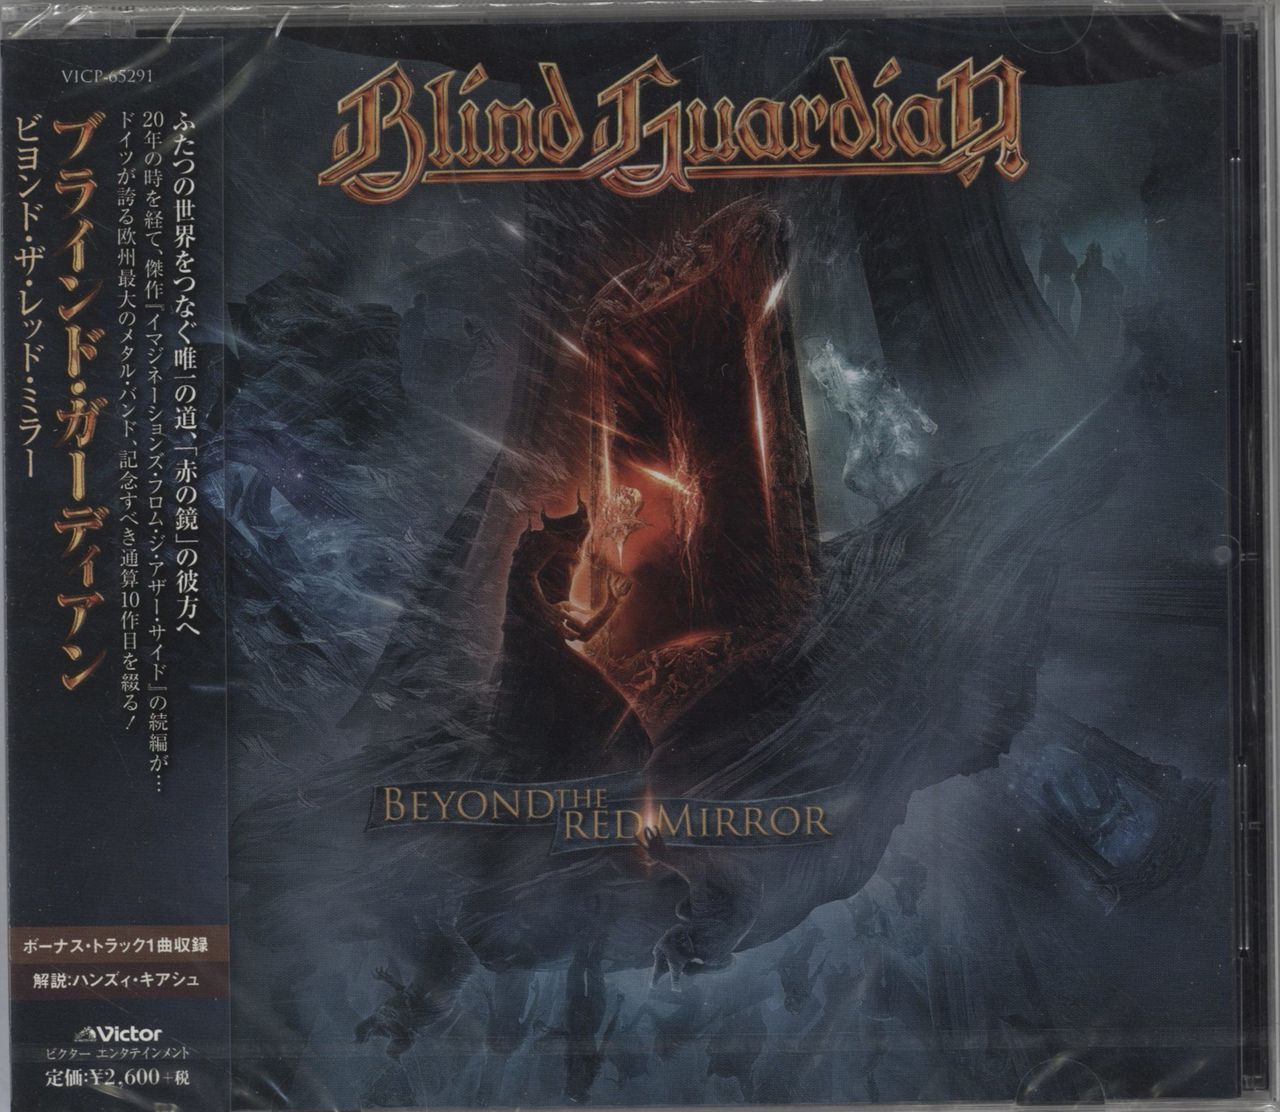 Blind Guardian Beyond The Red Mirror - Sealed Japanese Promo CD album (CDLP) VICP-65291